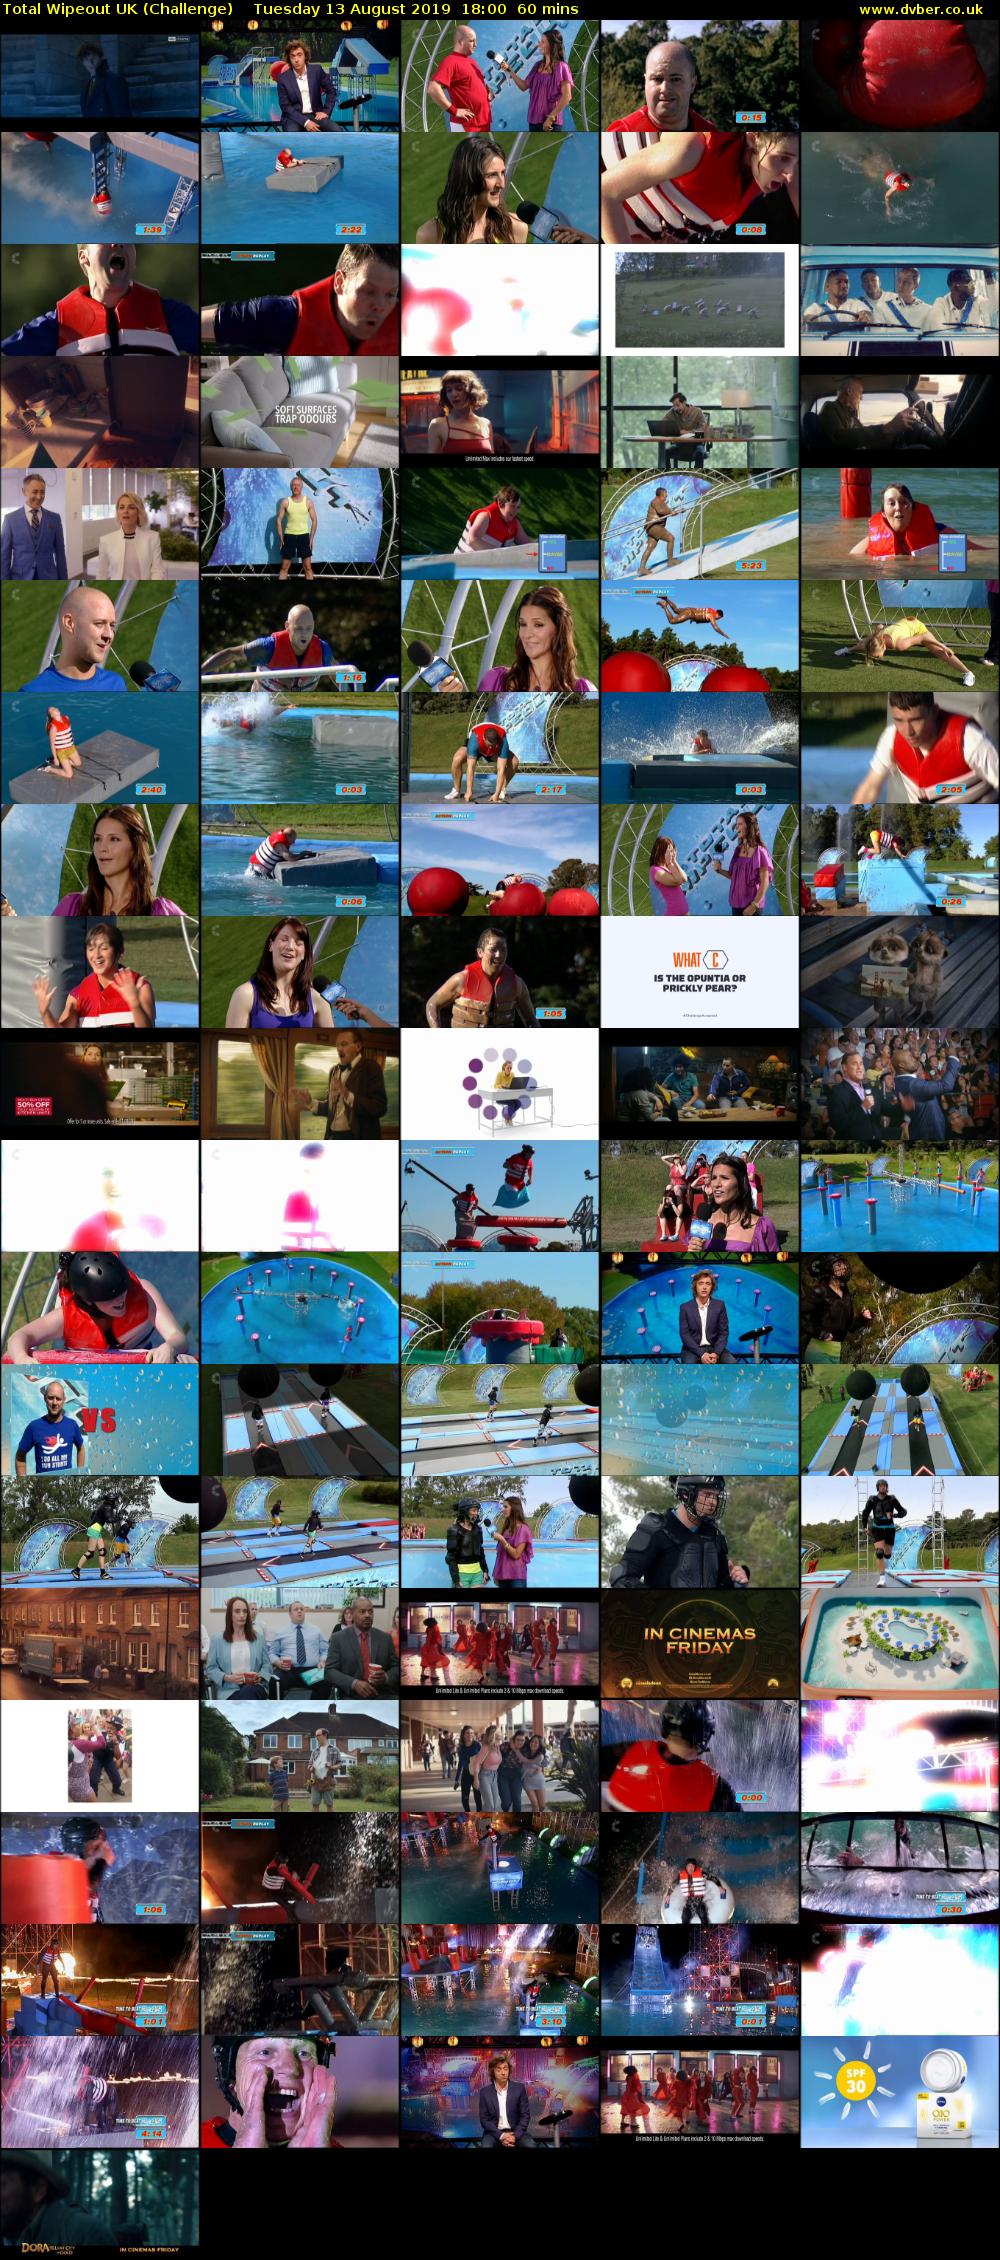 Total Wipeout UK (Challenge) Tuesday 13 August 2019 18:00 - 19:00